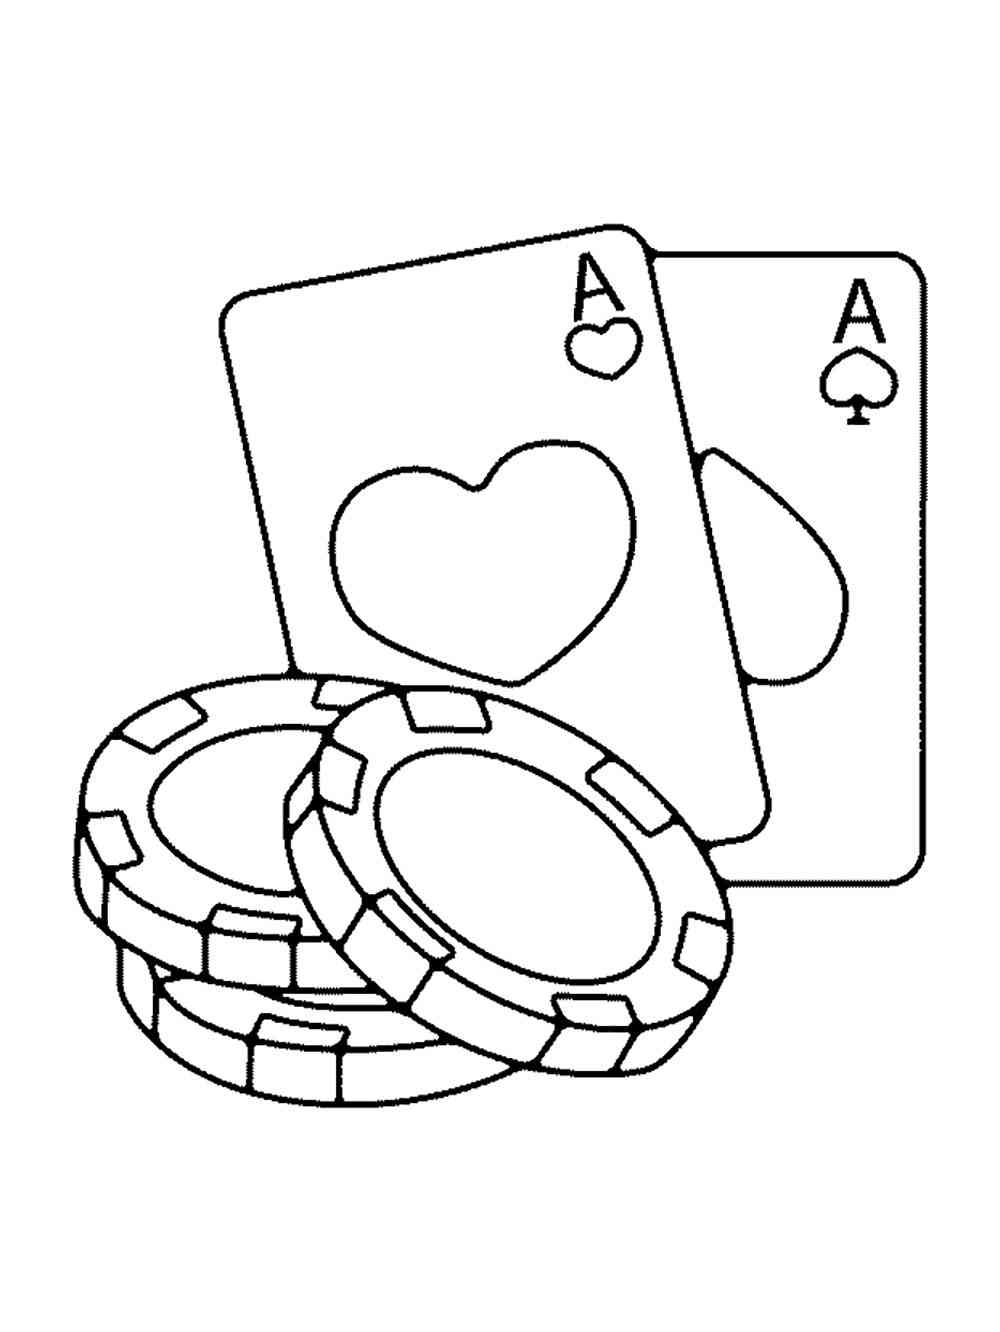 Casino coloring pages